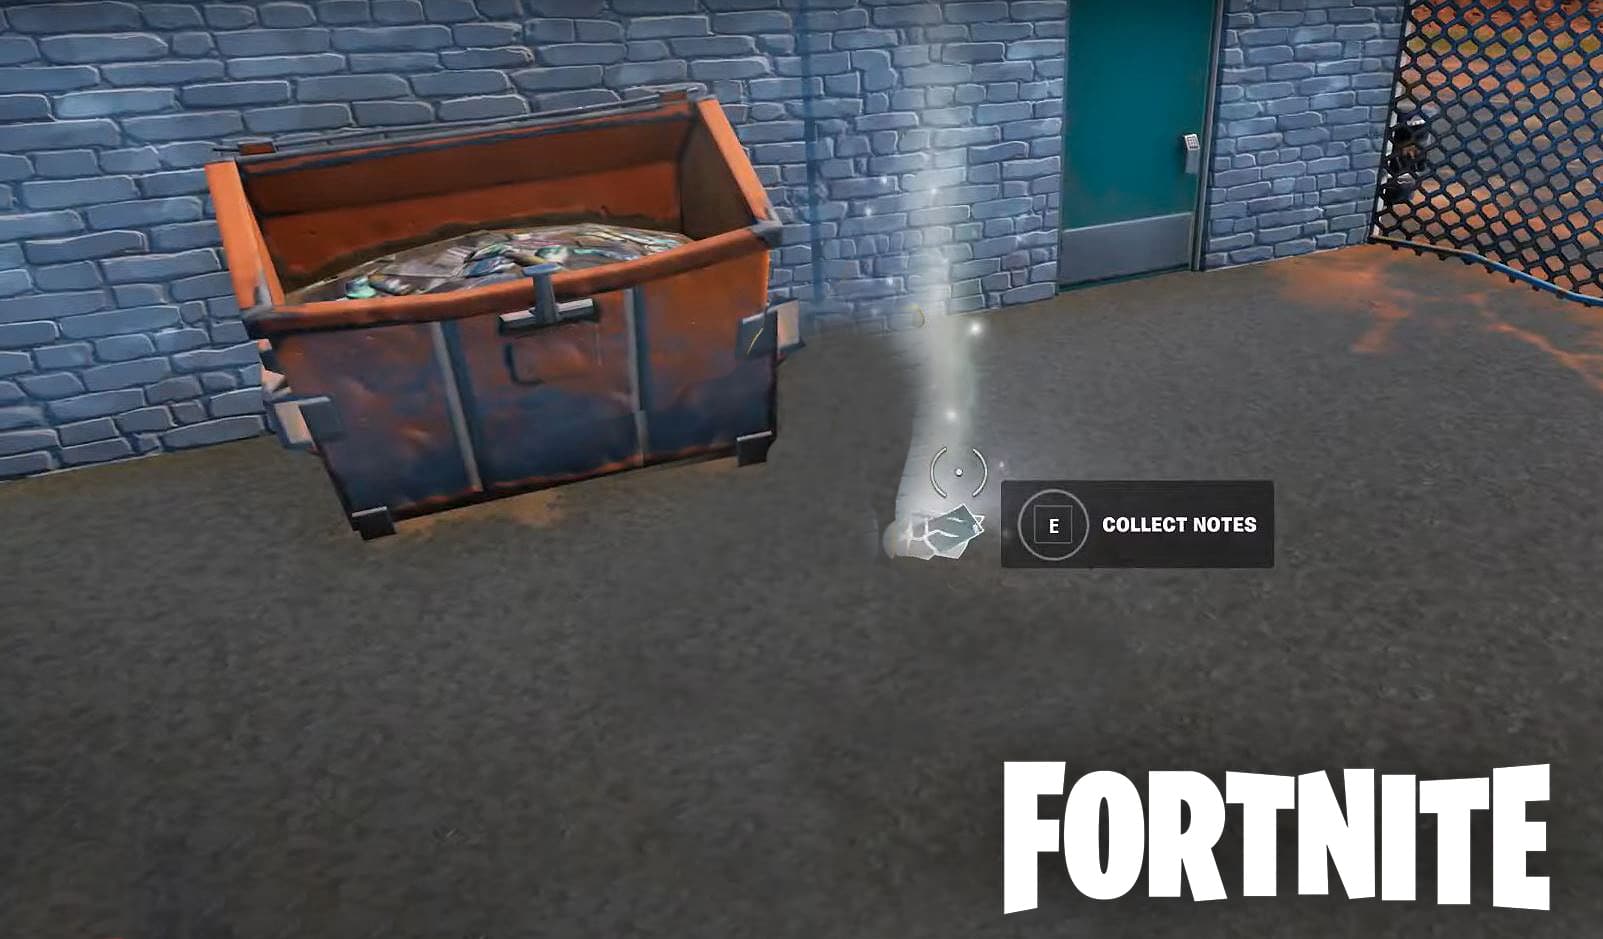 Open Dumpster and Scientist's Research Notes in Fortnite